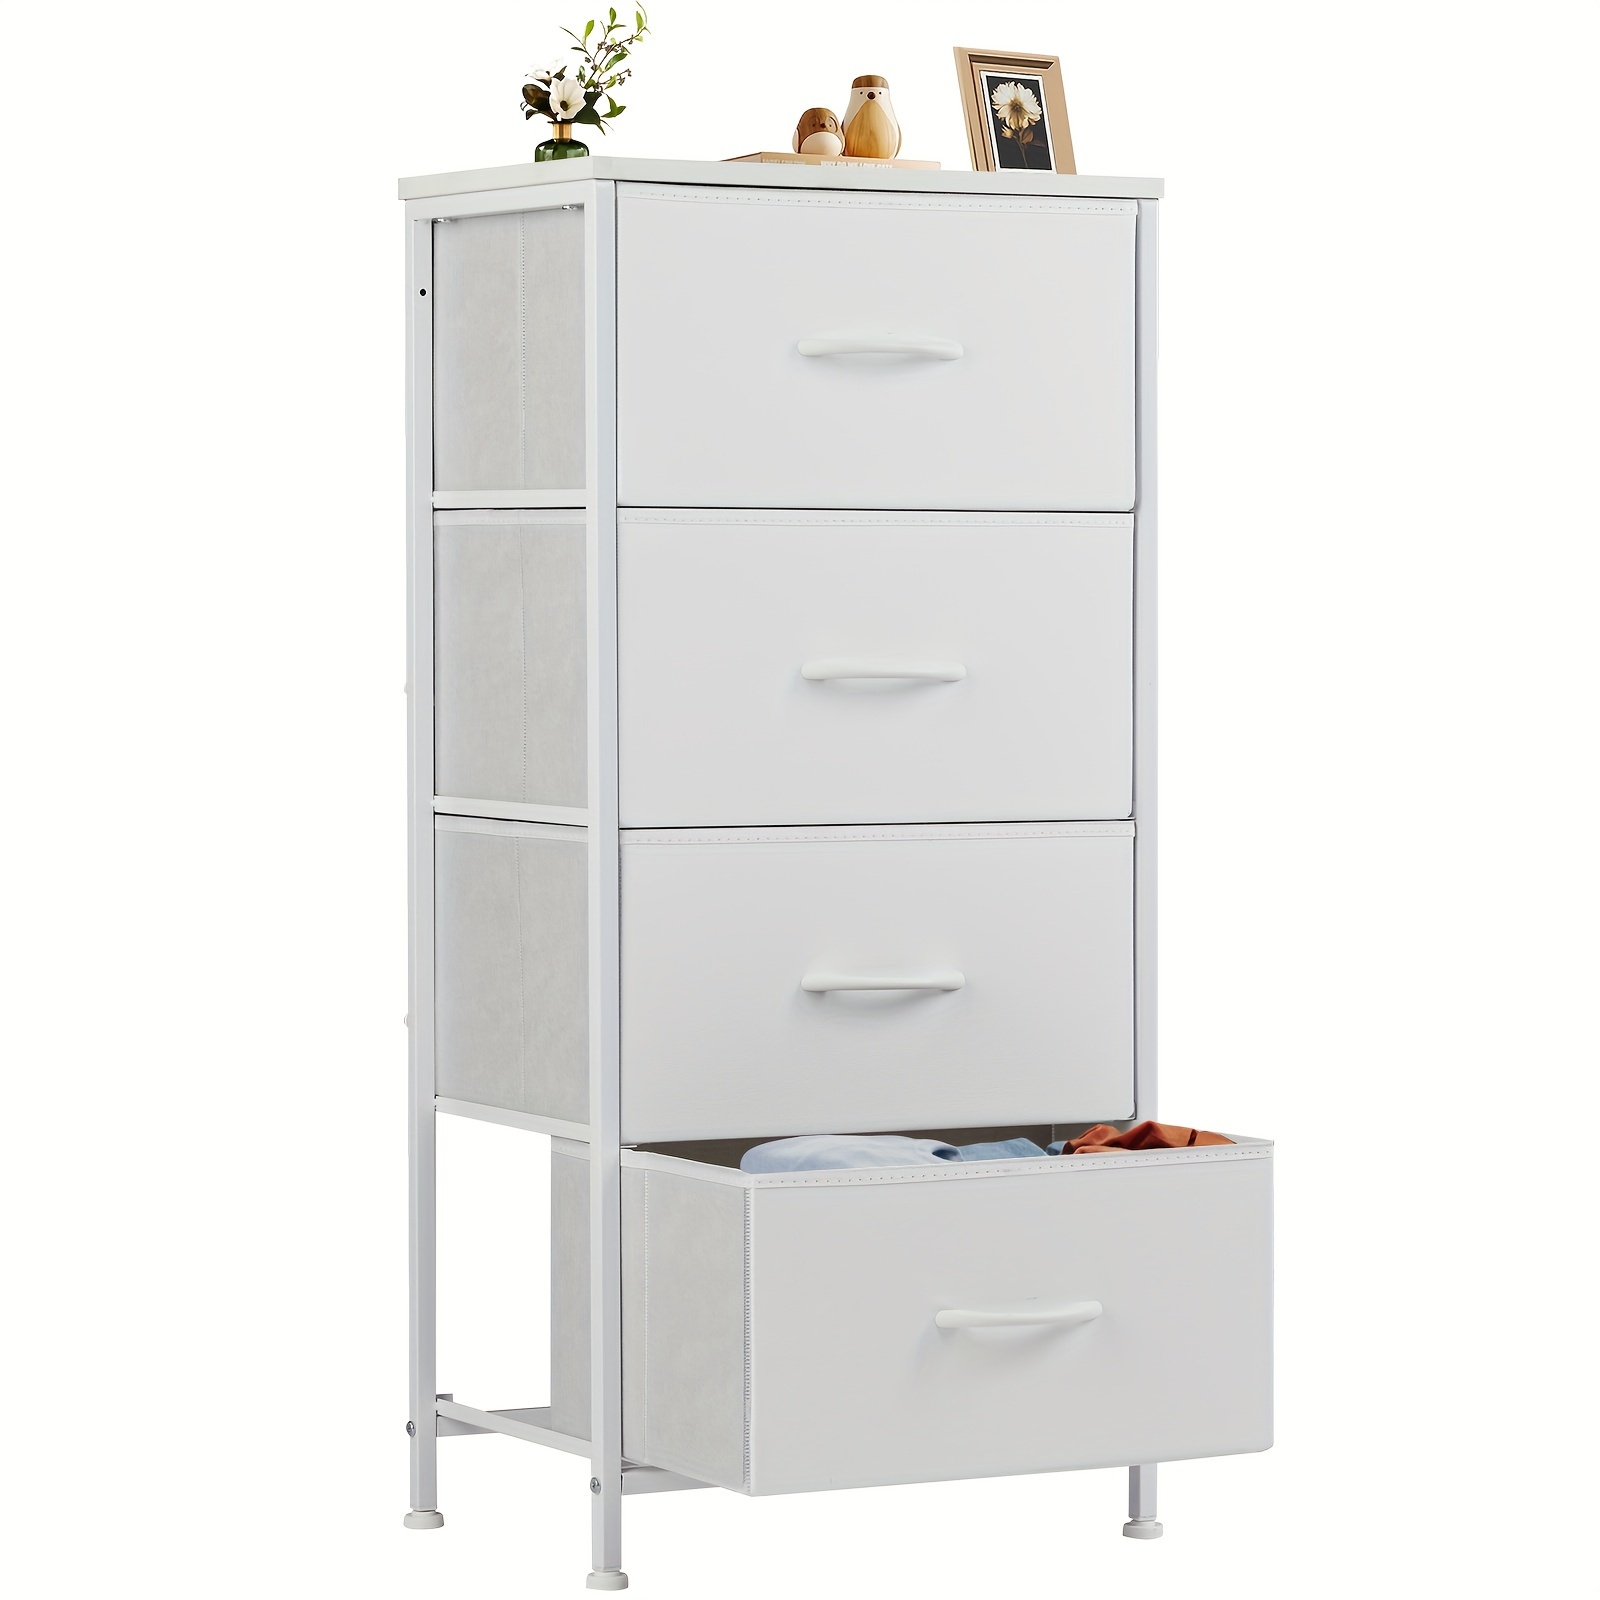 

Display Cabinet Display Rack With 4 Fabric Drawers, Suitable For Bedrooms And Living Rooms